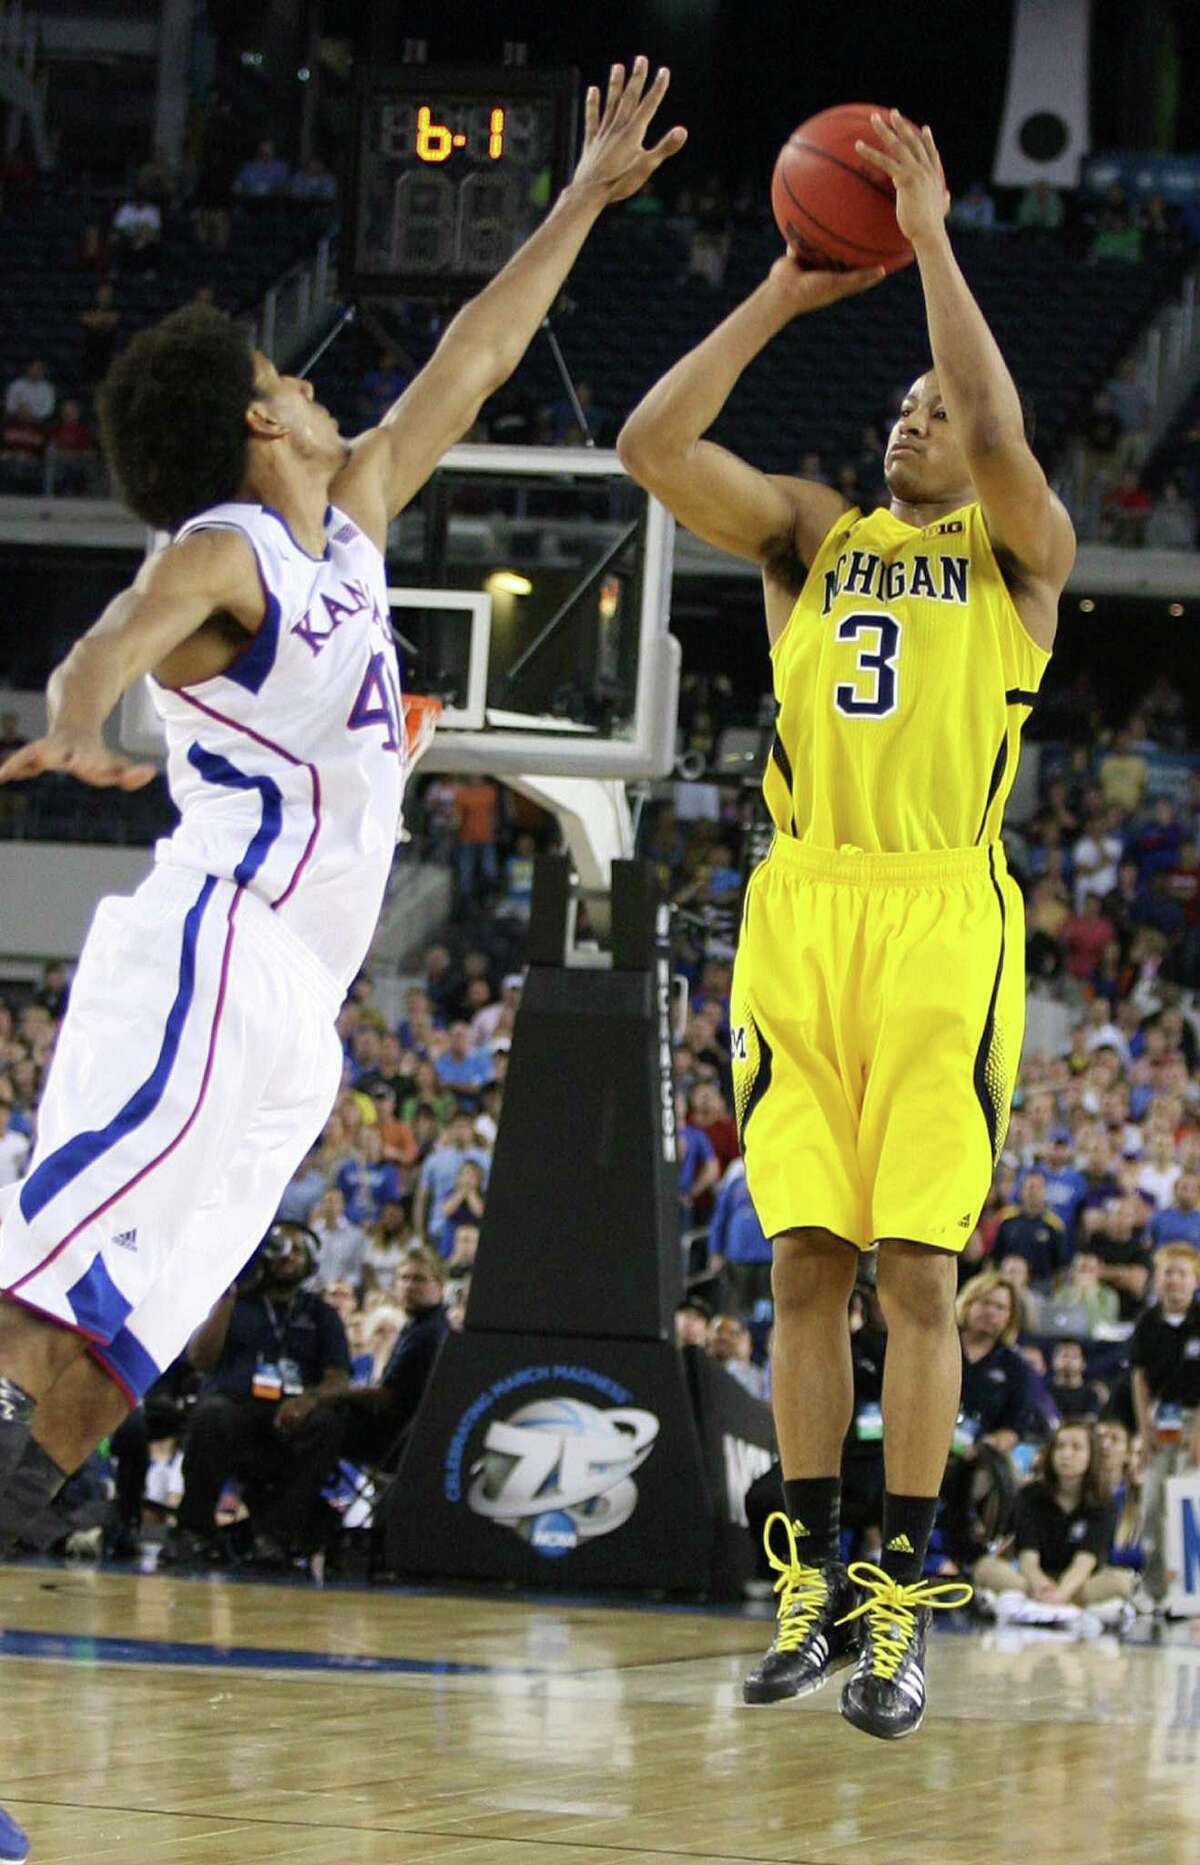 Michigan's Trey Burke scored 23 points, including this 3-pointer against Kansas' Kevin Young in the final seconds that sent Friday's game to overtime.